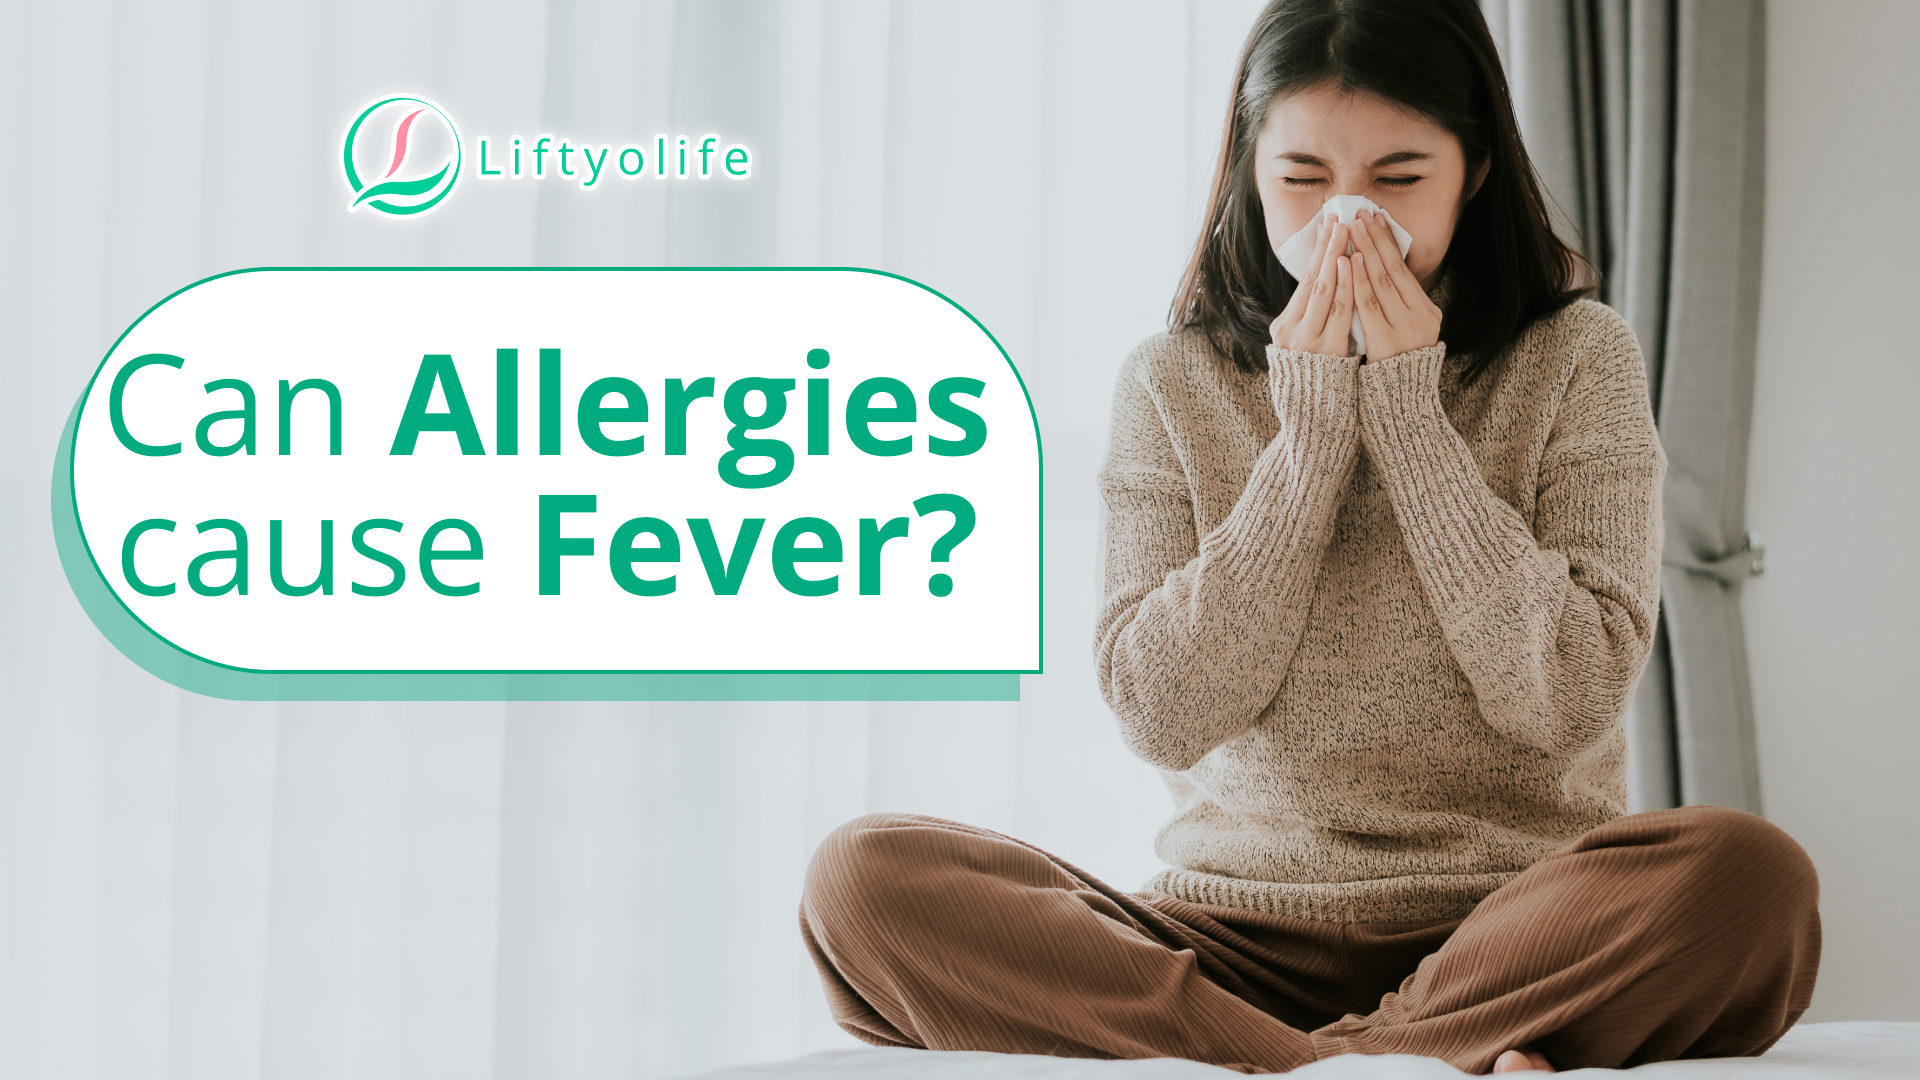 Can Allergies Cause Fever?